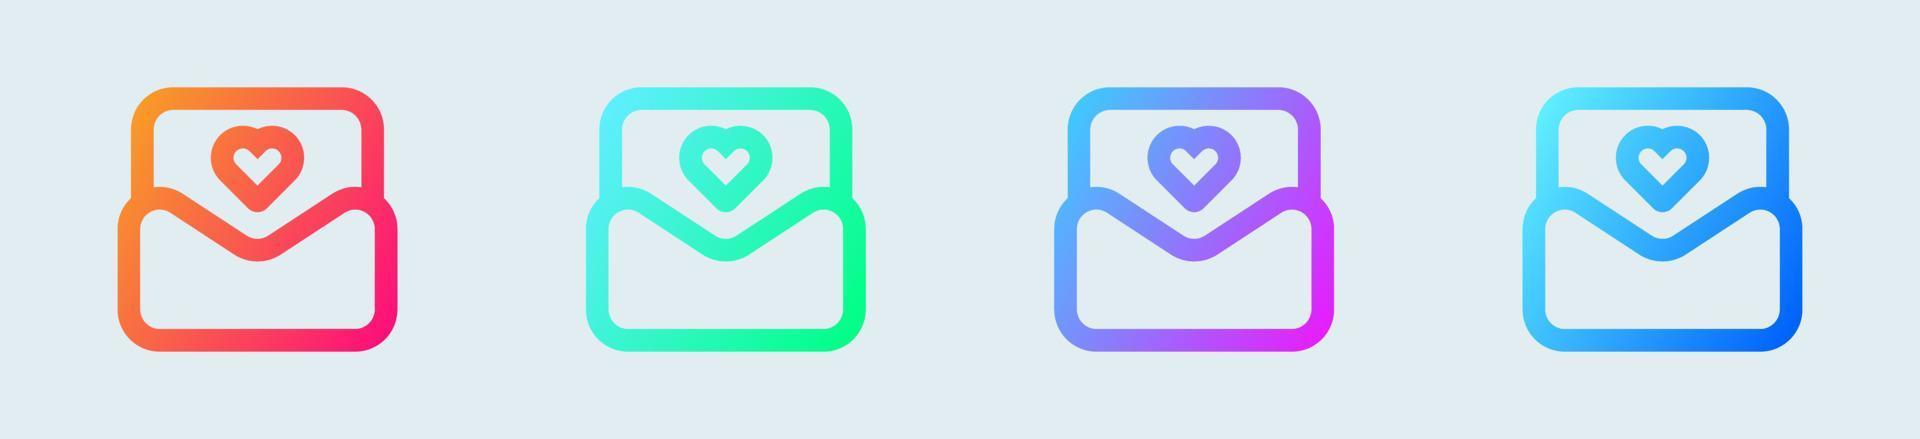 Letter line icon in gradient colors. Message signs vector illustration.